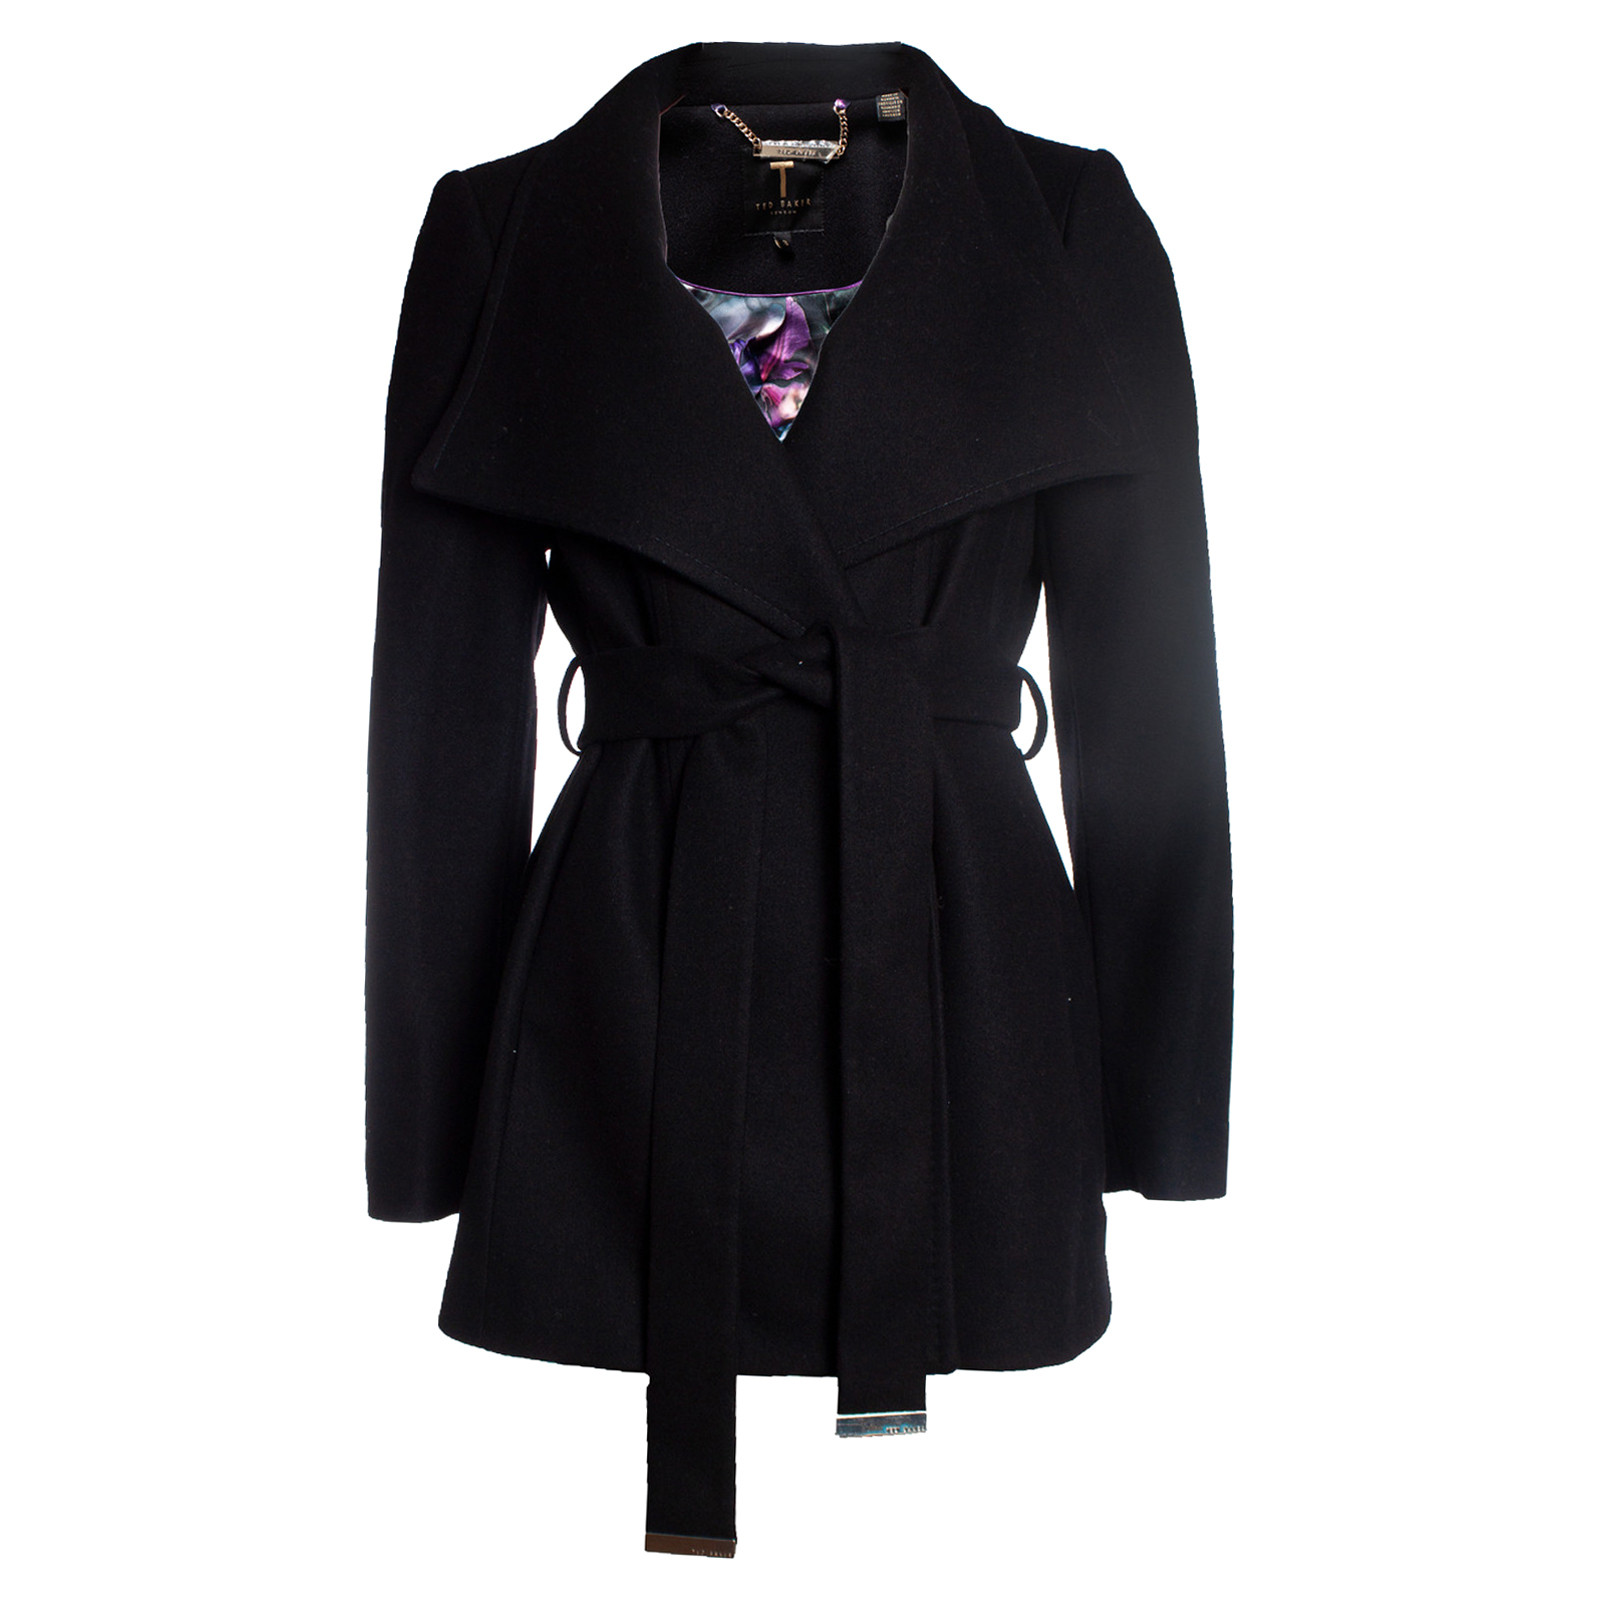 Ted Baker Jacke/Mantel aus Wolle in Schwarz - Second Hand Ted Baker Jacke/ Mantel aus Wolle in Schwarz buy used for 210€ (7592275)